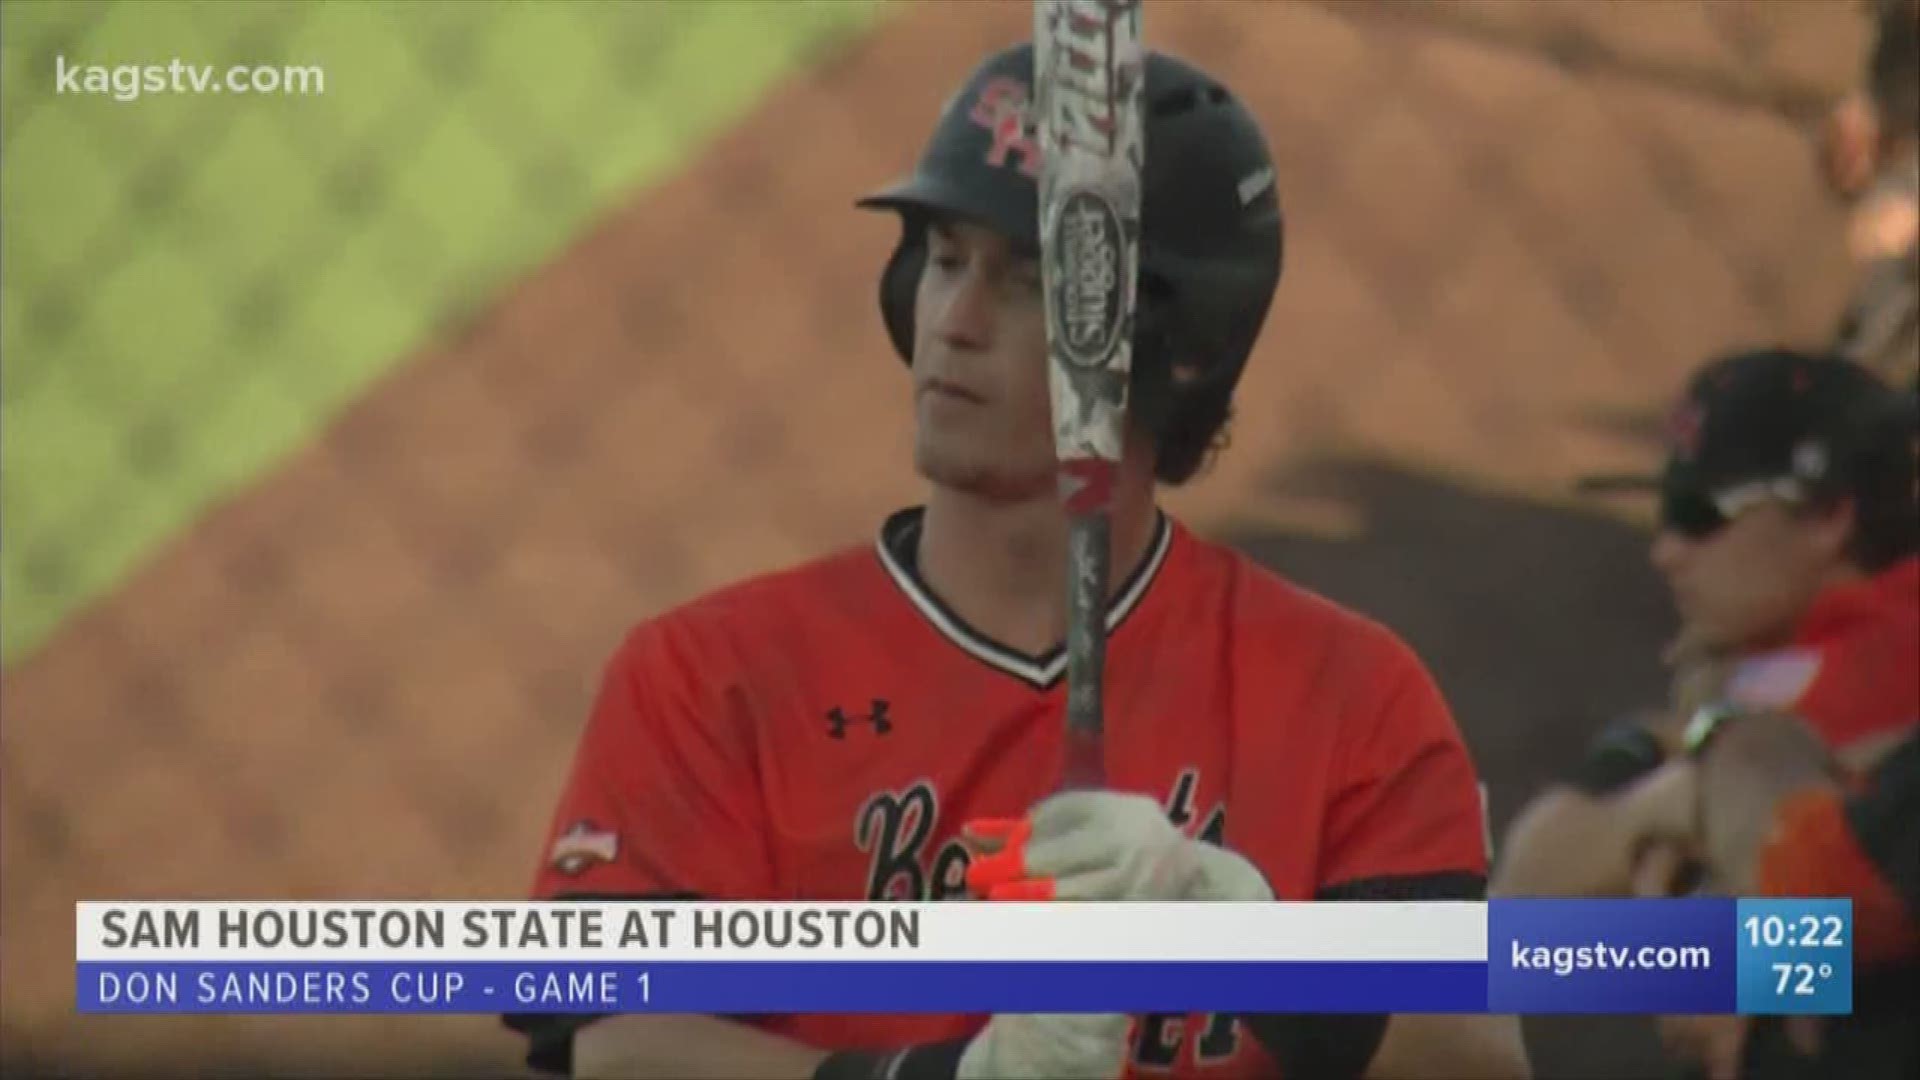 Houston defeated Sam Houston State 9-4 in game 1 of the Don Sanders Cup on Tuesday.